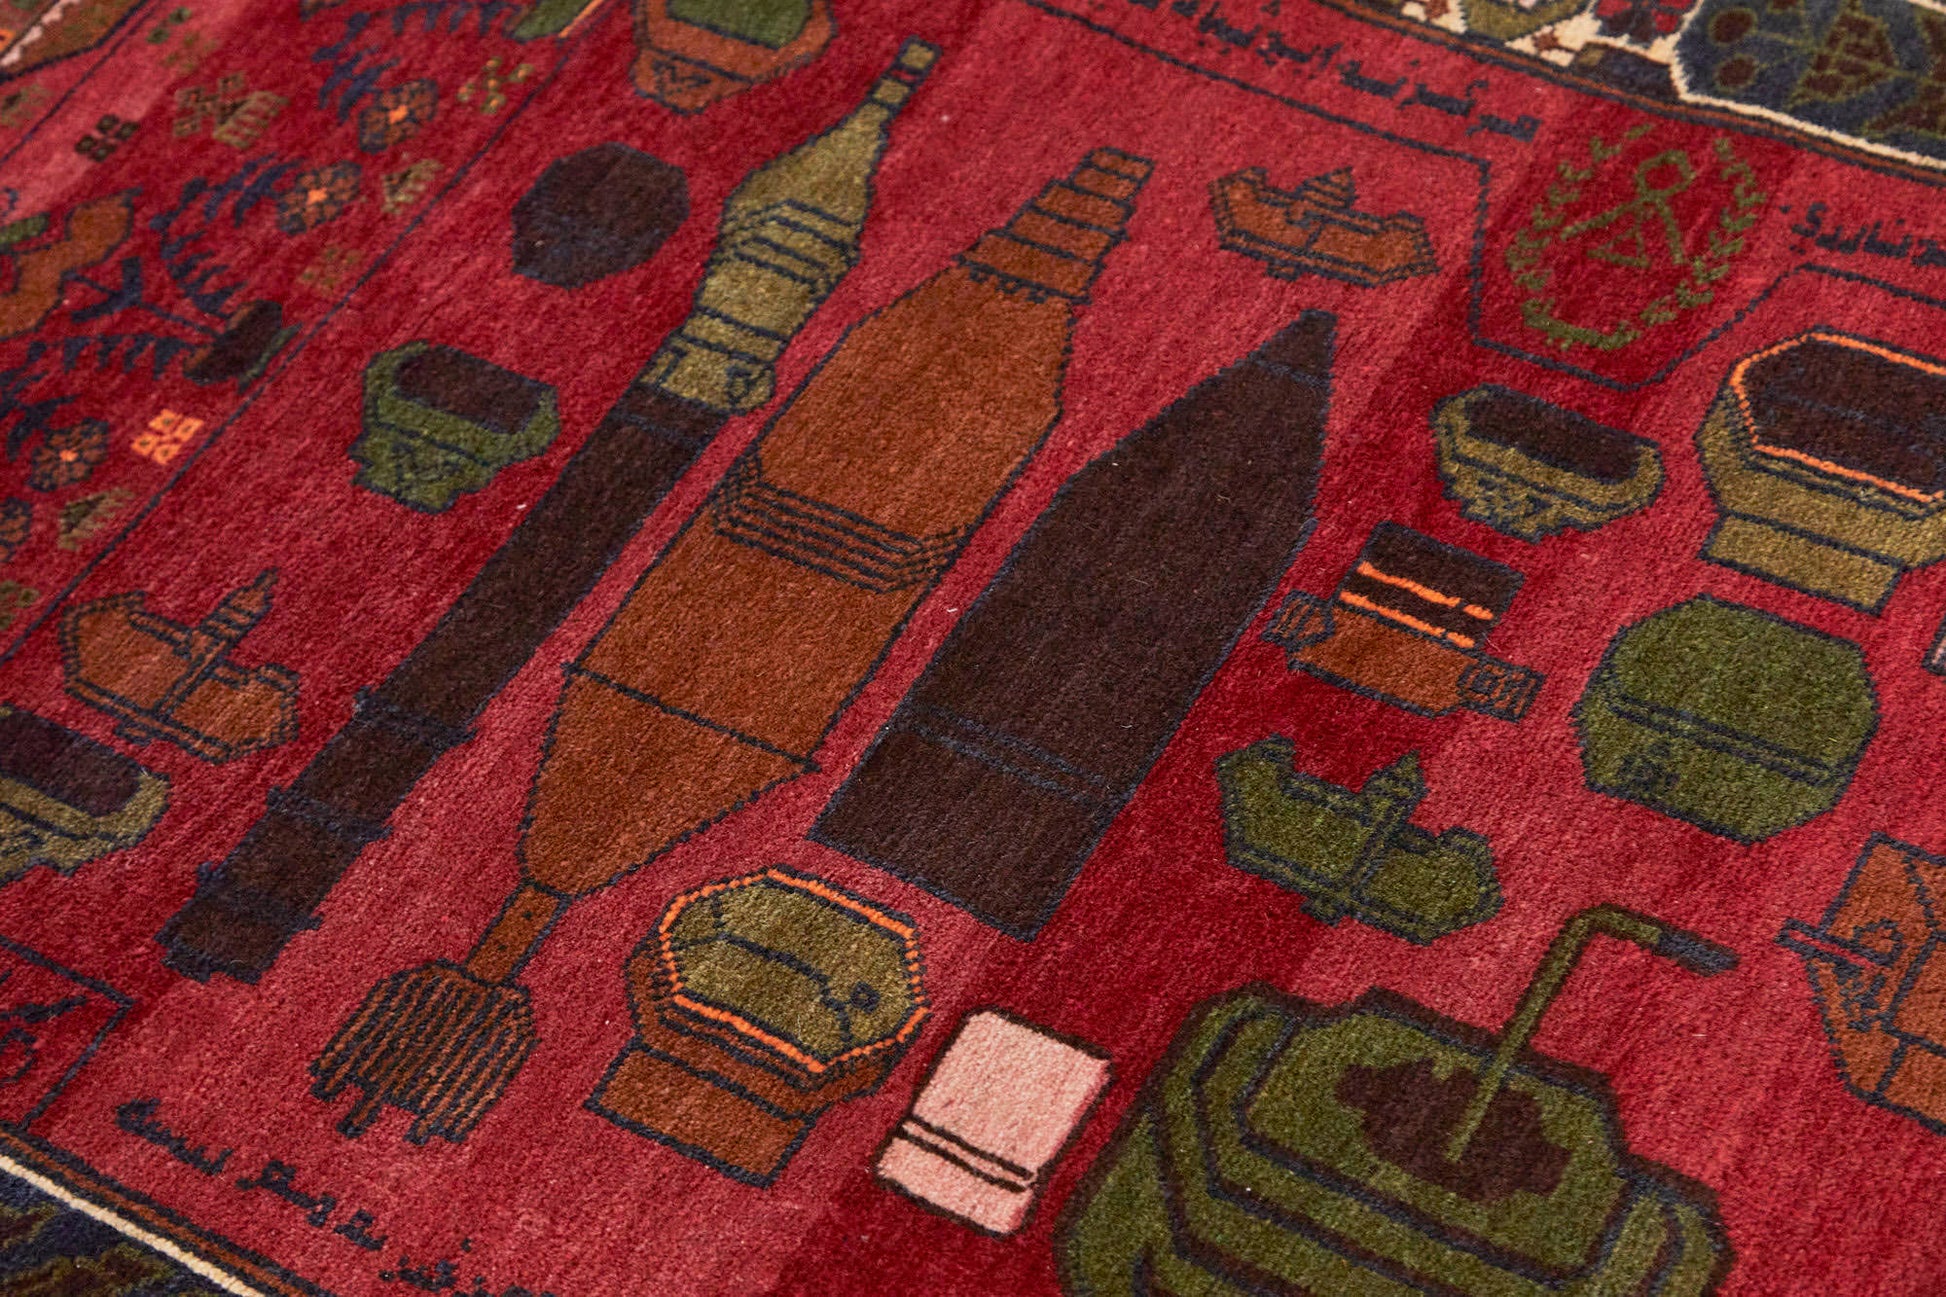 Detail of Afghan hand woven "Unexploded Ordinance" rug, with deep red base, and green, yellow, tan and cream images depicting weapons, buildings and flowers - Available from King Kennedy Rugs Los Angeles